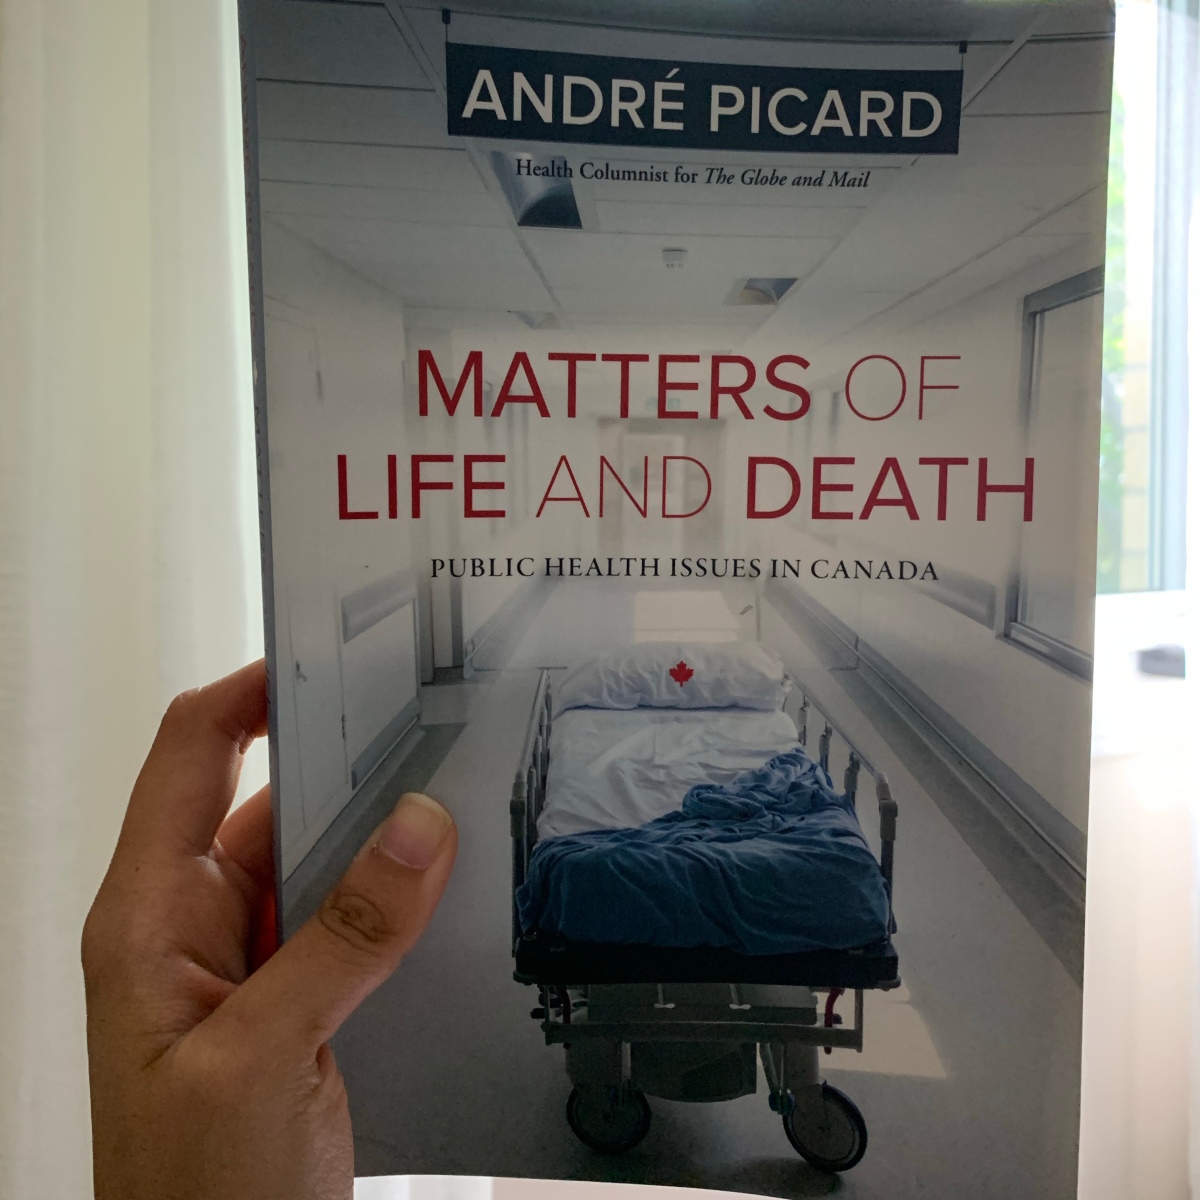 ‘Matters of Life and Death’ by André Picard